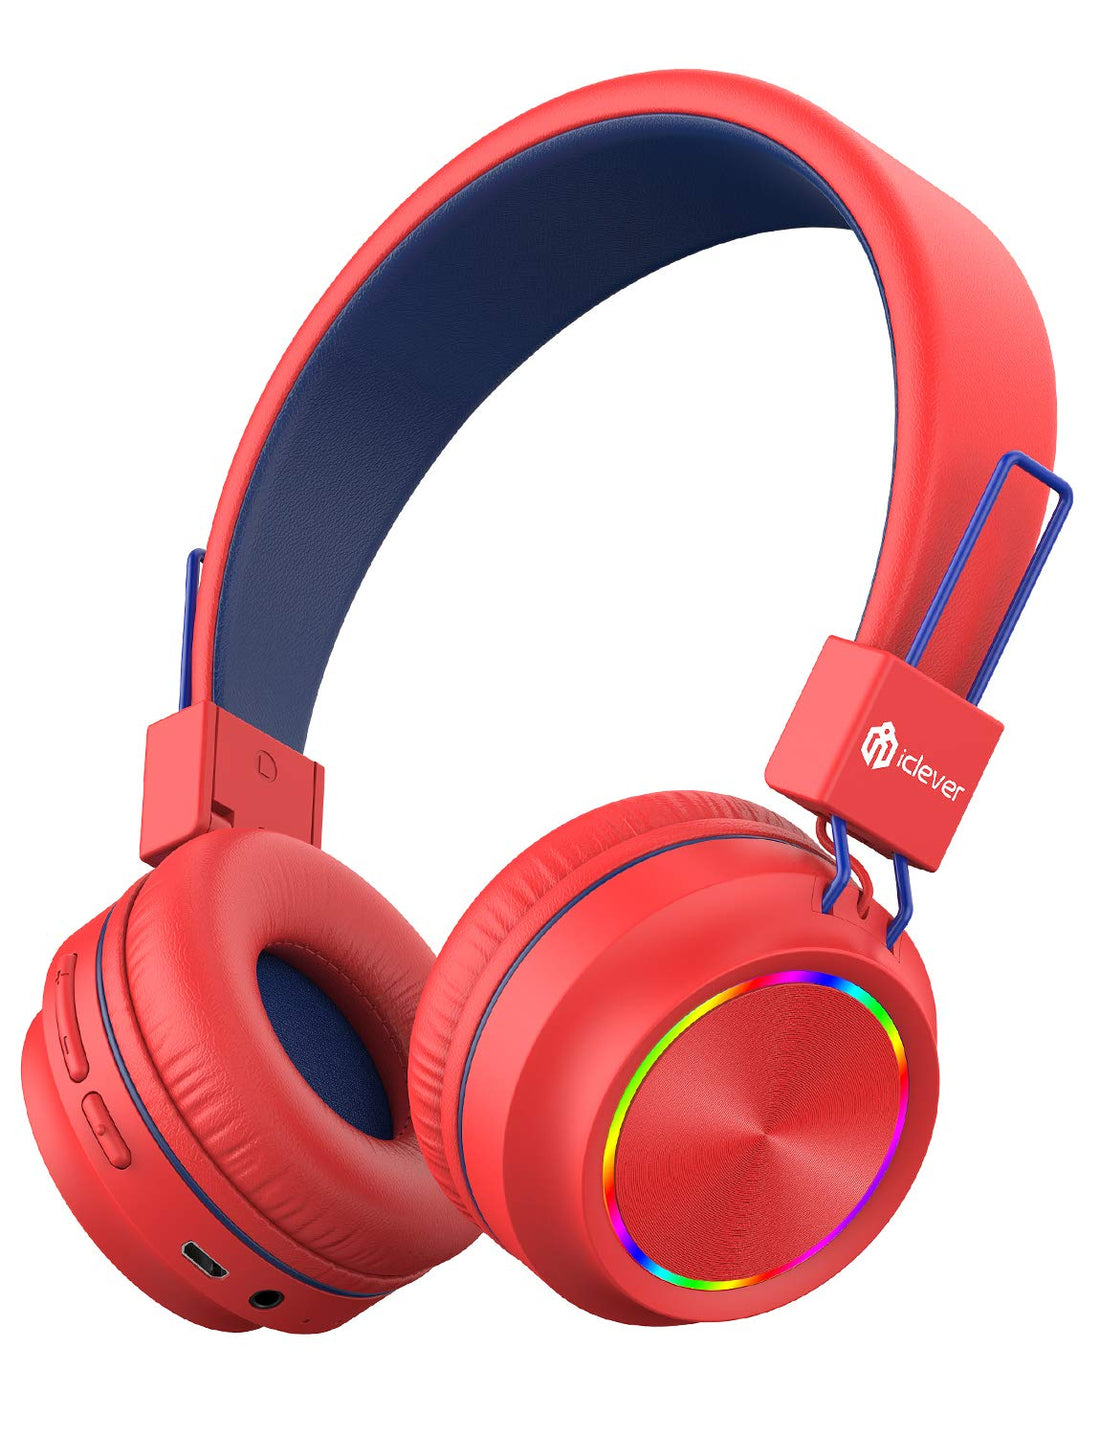 iClever BTH03 Kids Wireless Headphones, Colorful LED Lights Kids Headphones with MIC, 25H Playtime, Stereo Sound, Bluetooth 5.0, Foldable, Childrens Headphones on Ear for Study Tablet Airplane, Red